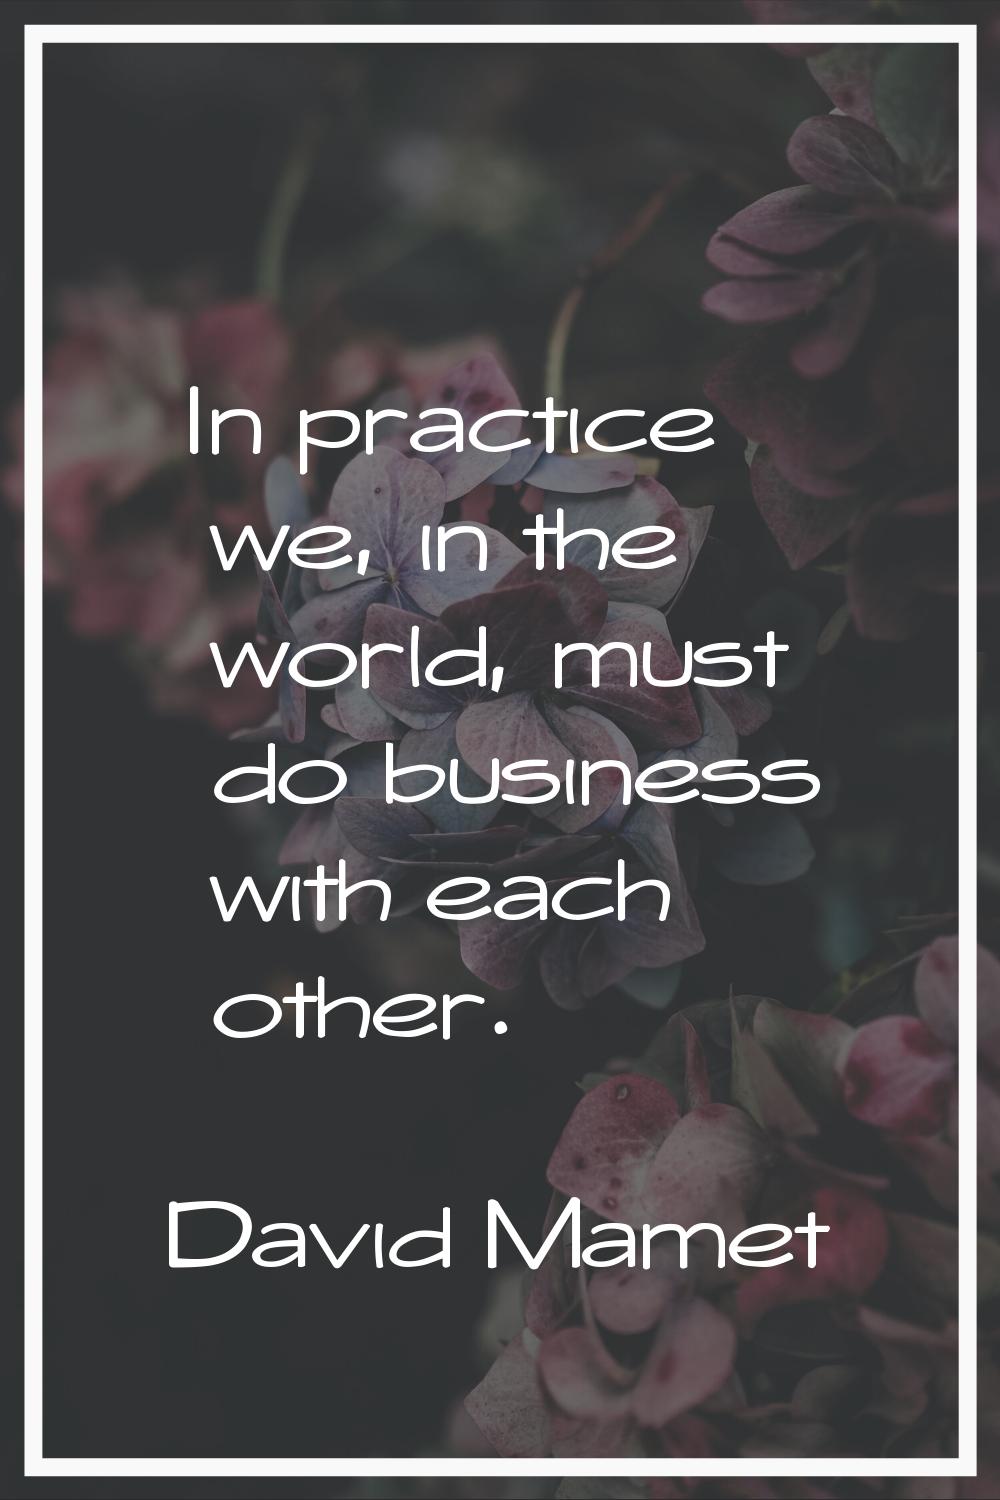 In practice we, in the world, must do business with each other.